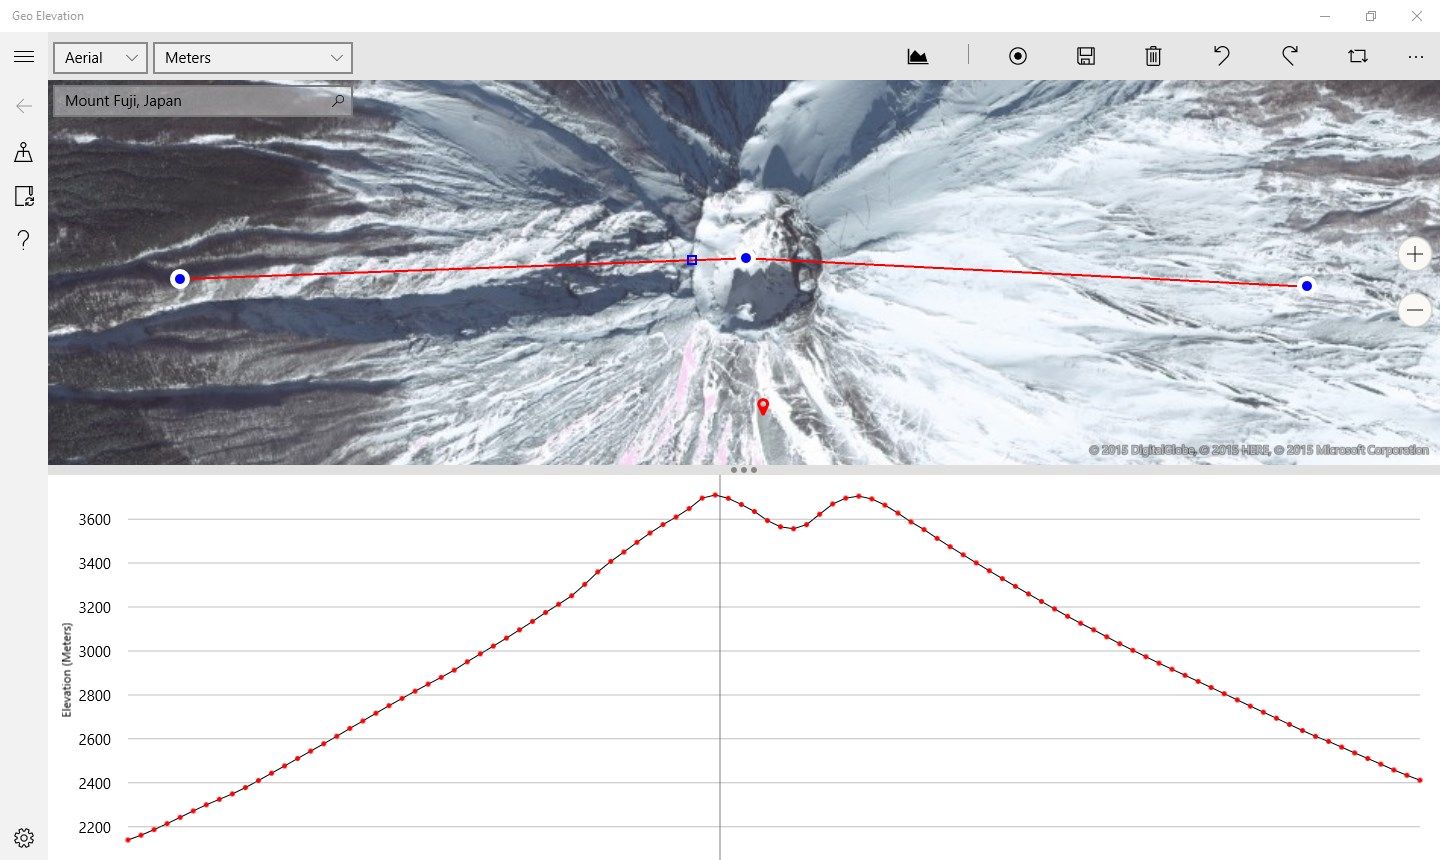 Mt Fuji Elevation Profile with Areal base map